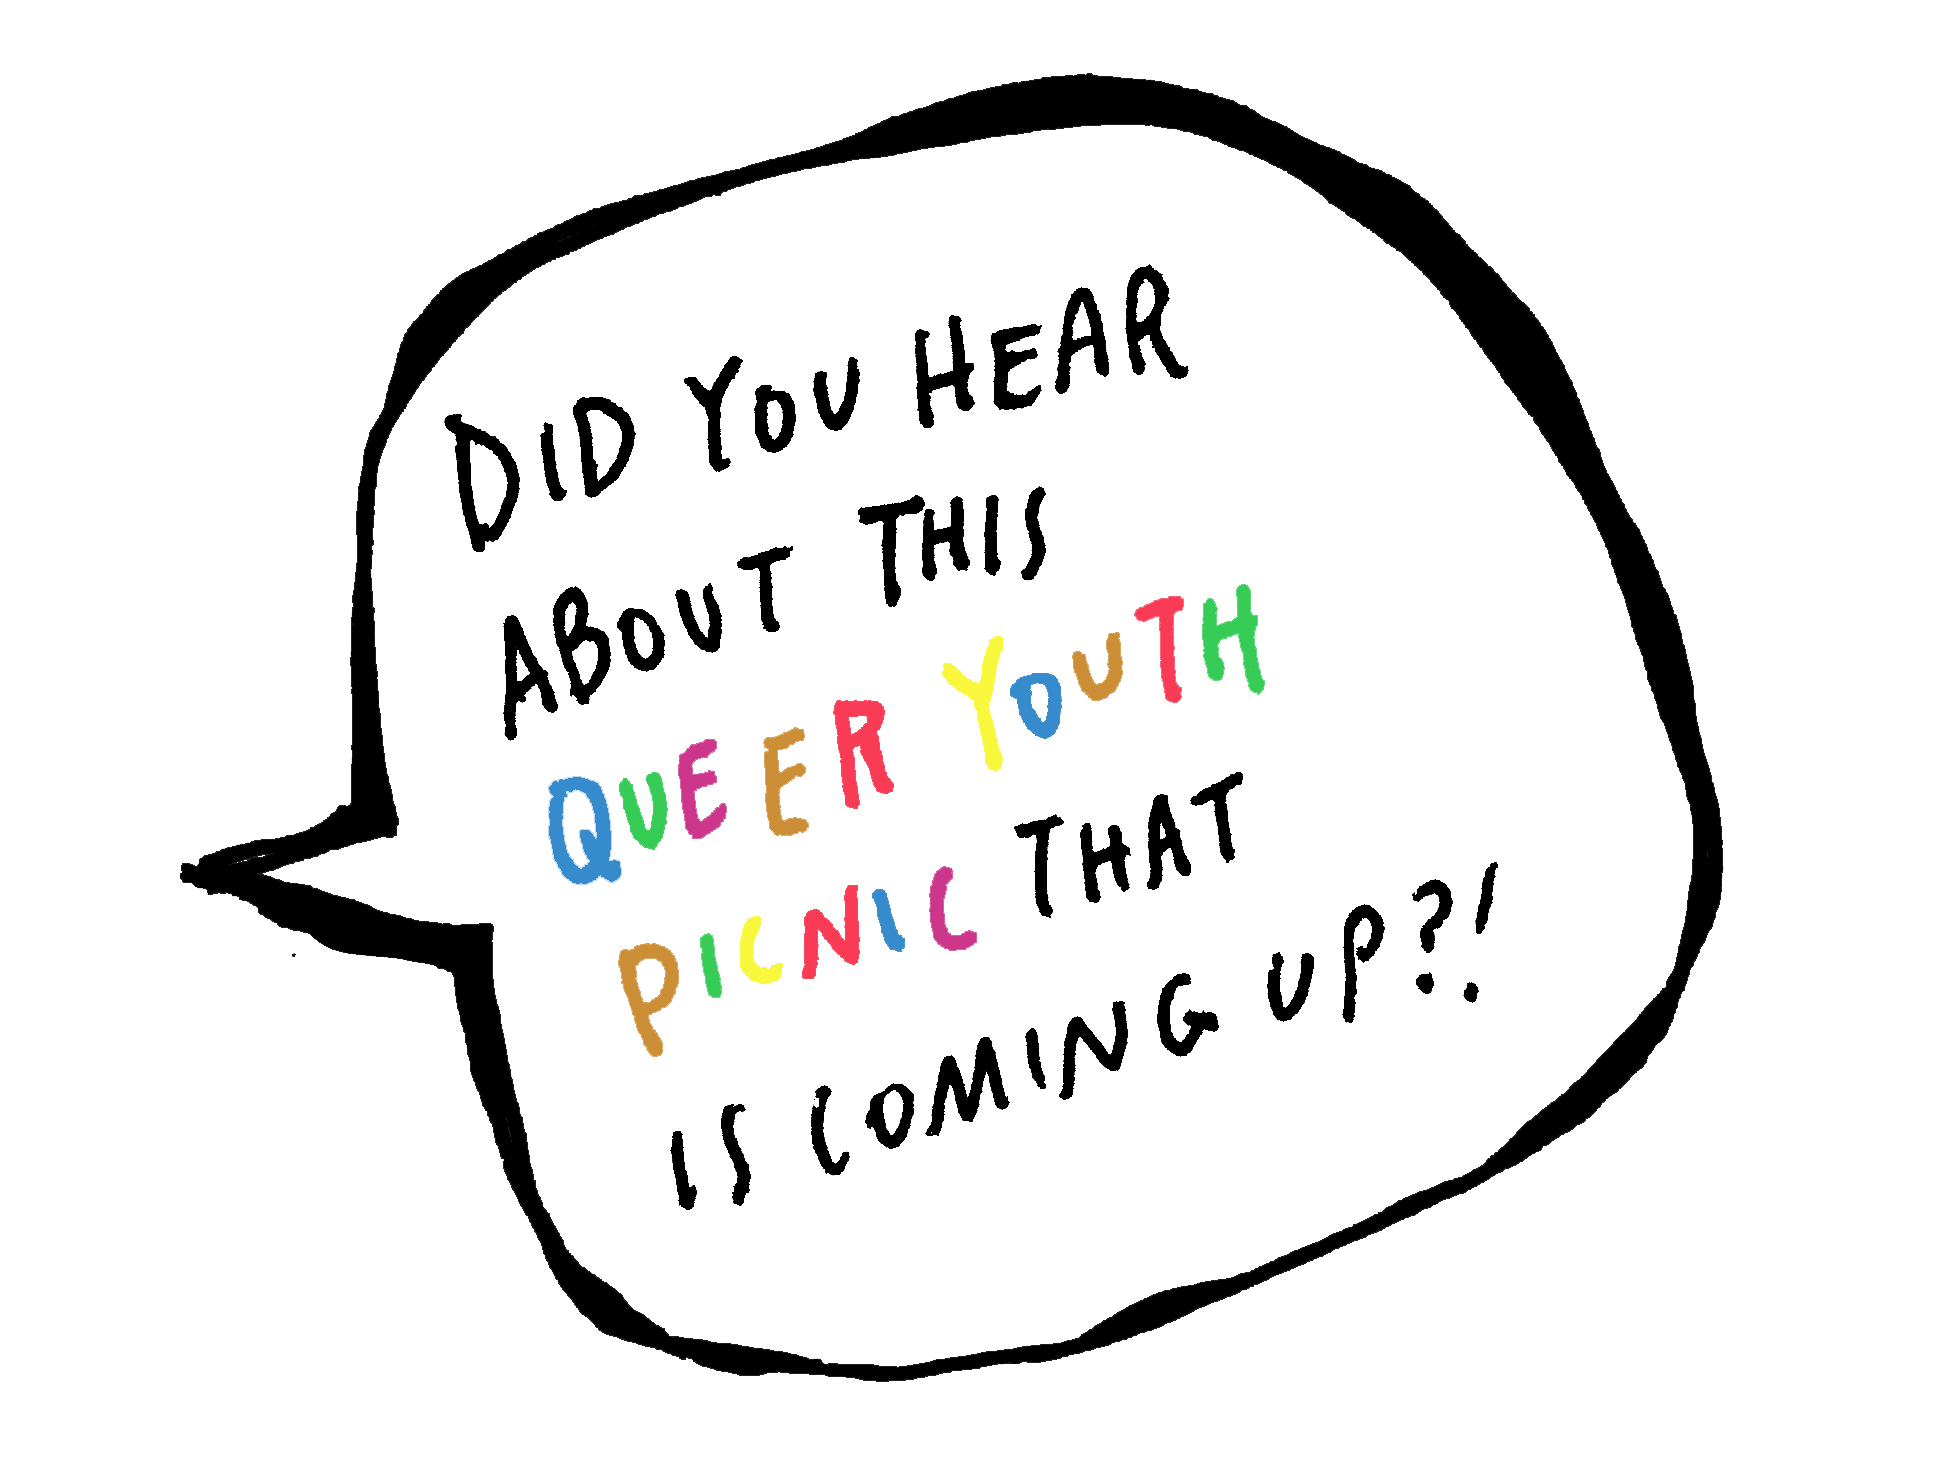 An illustrated chat bubble with text in it that says "Did you hear about this queer youth picnic coming up?!"